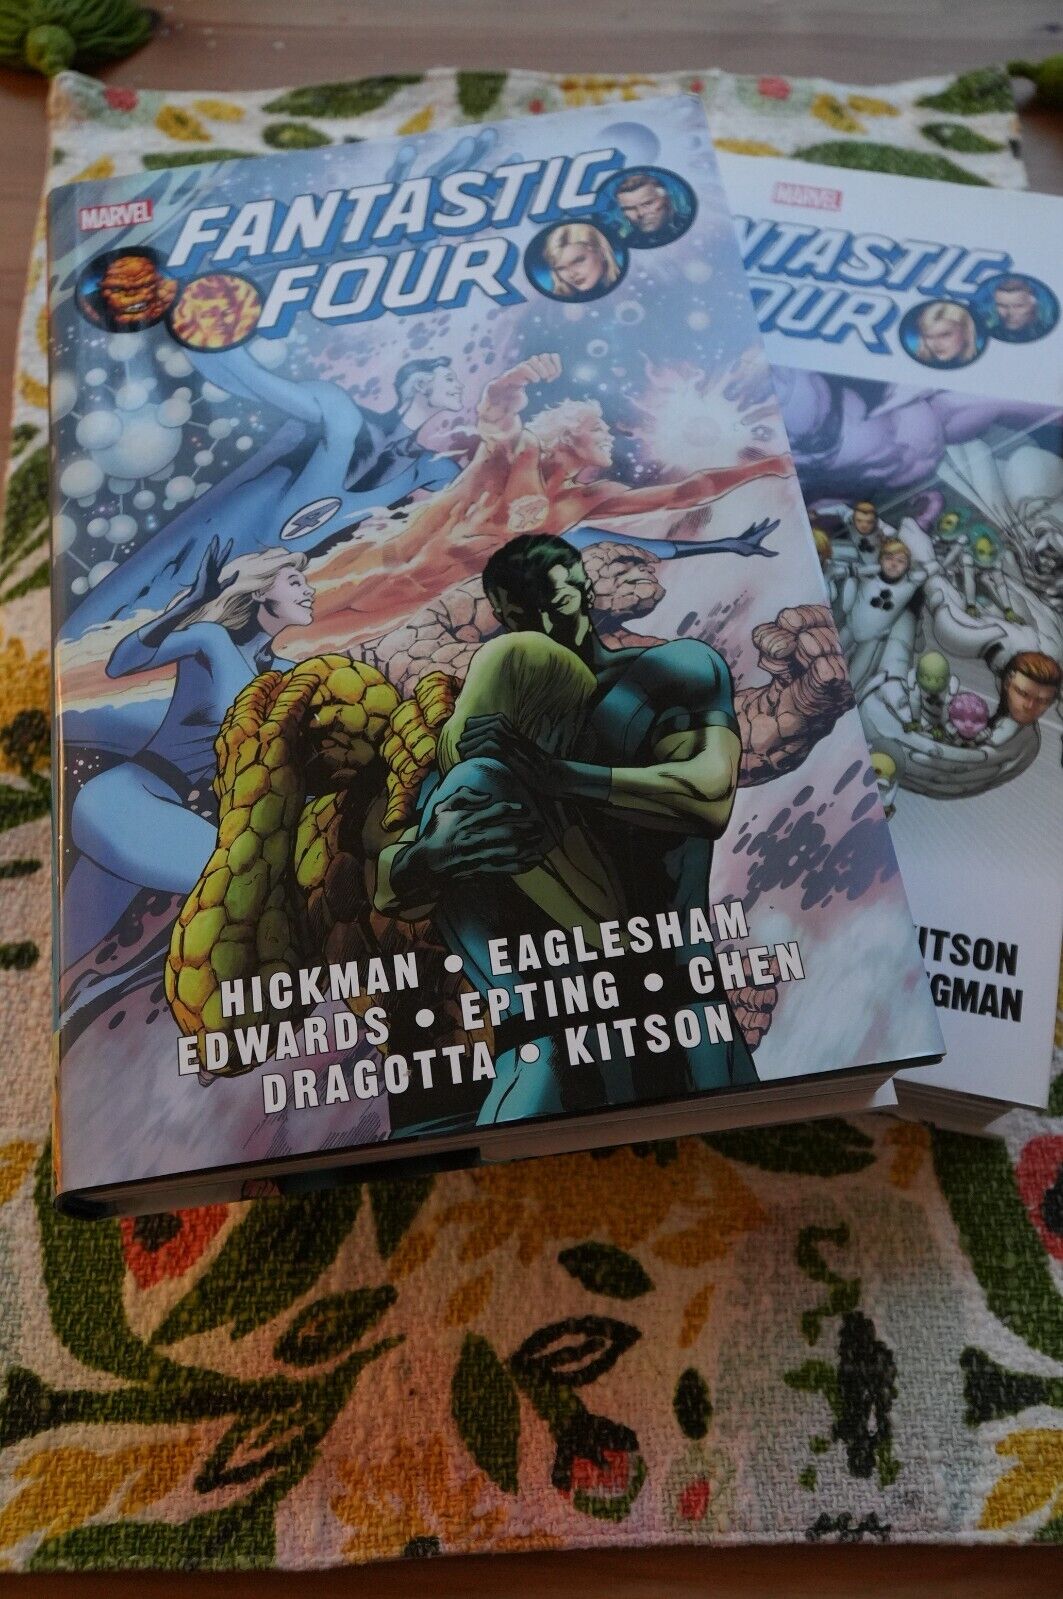 Fantastic Four by Jonathan Hickman Omnibus Vol. 1-2 DM Variant Covers